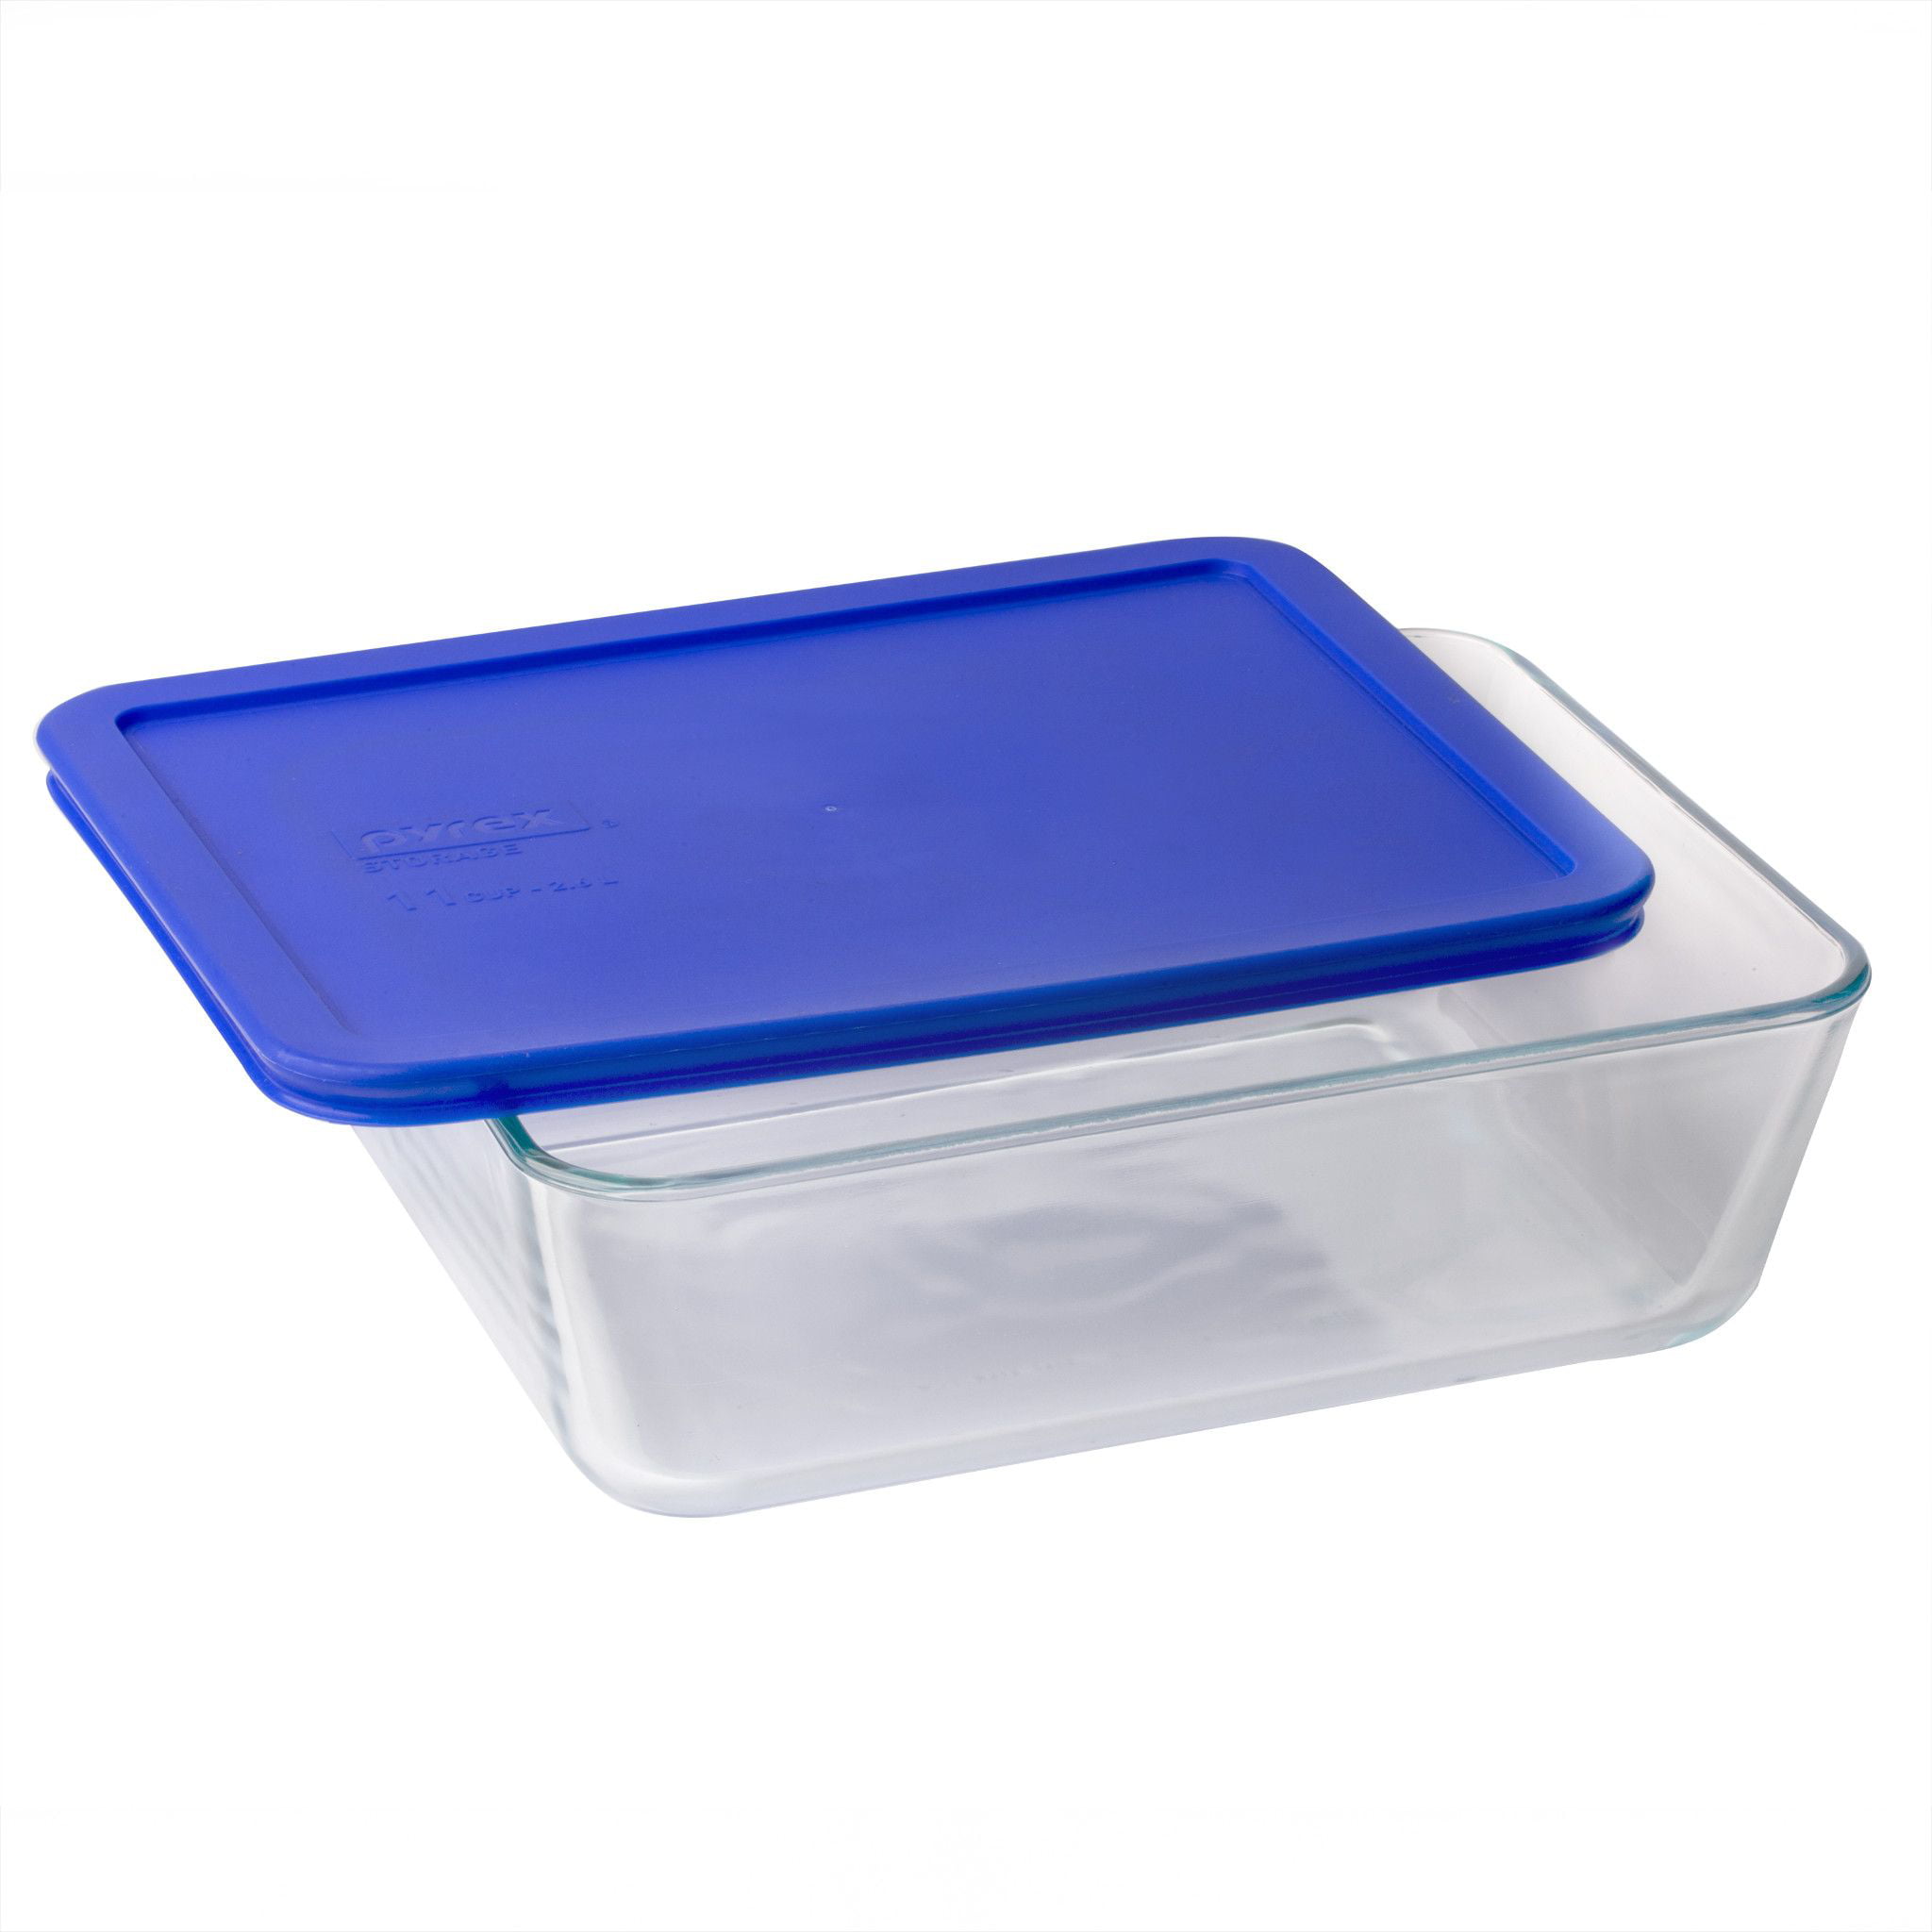 Pyrex Simply Glass Store Set, 1 ct - Smith's Food and Drug